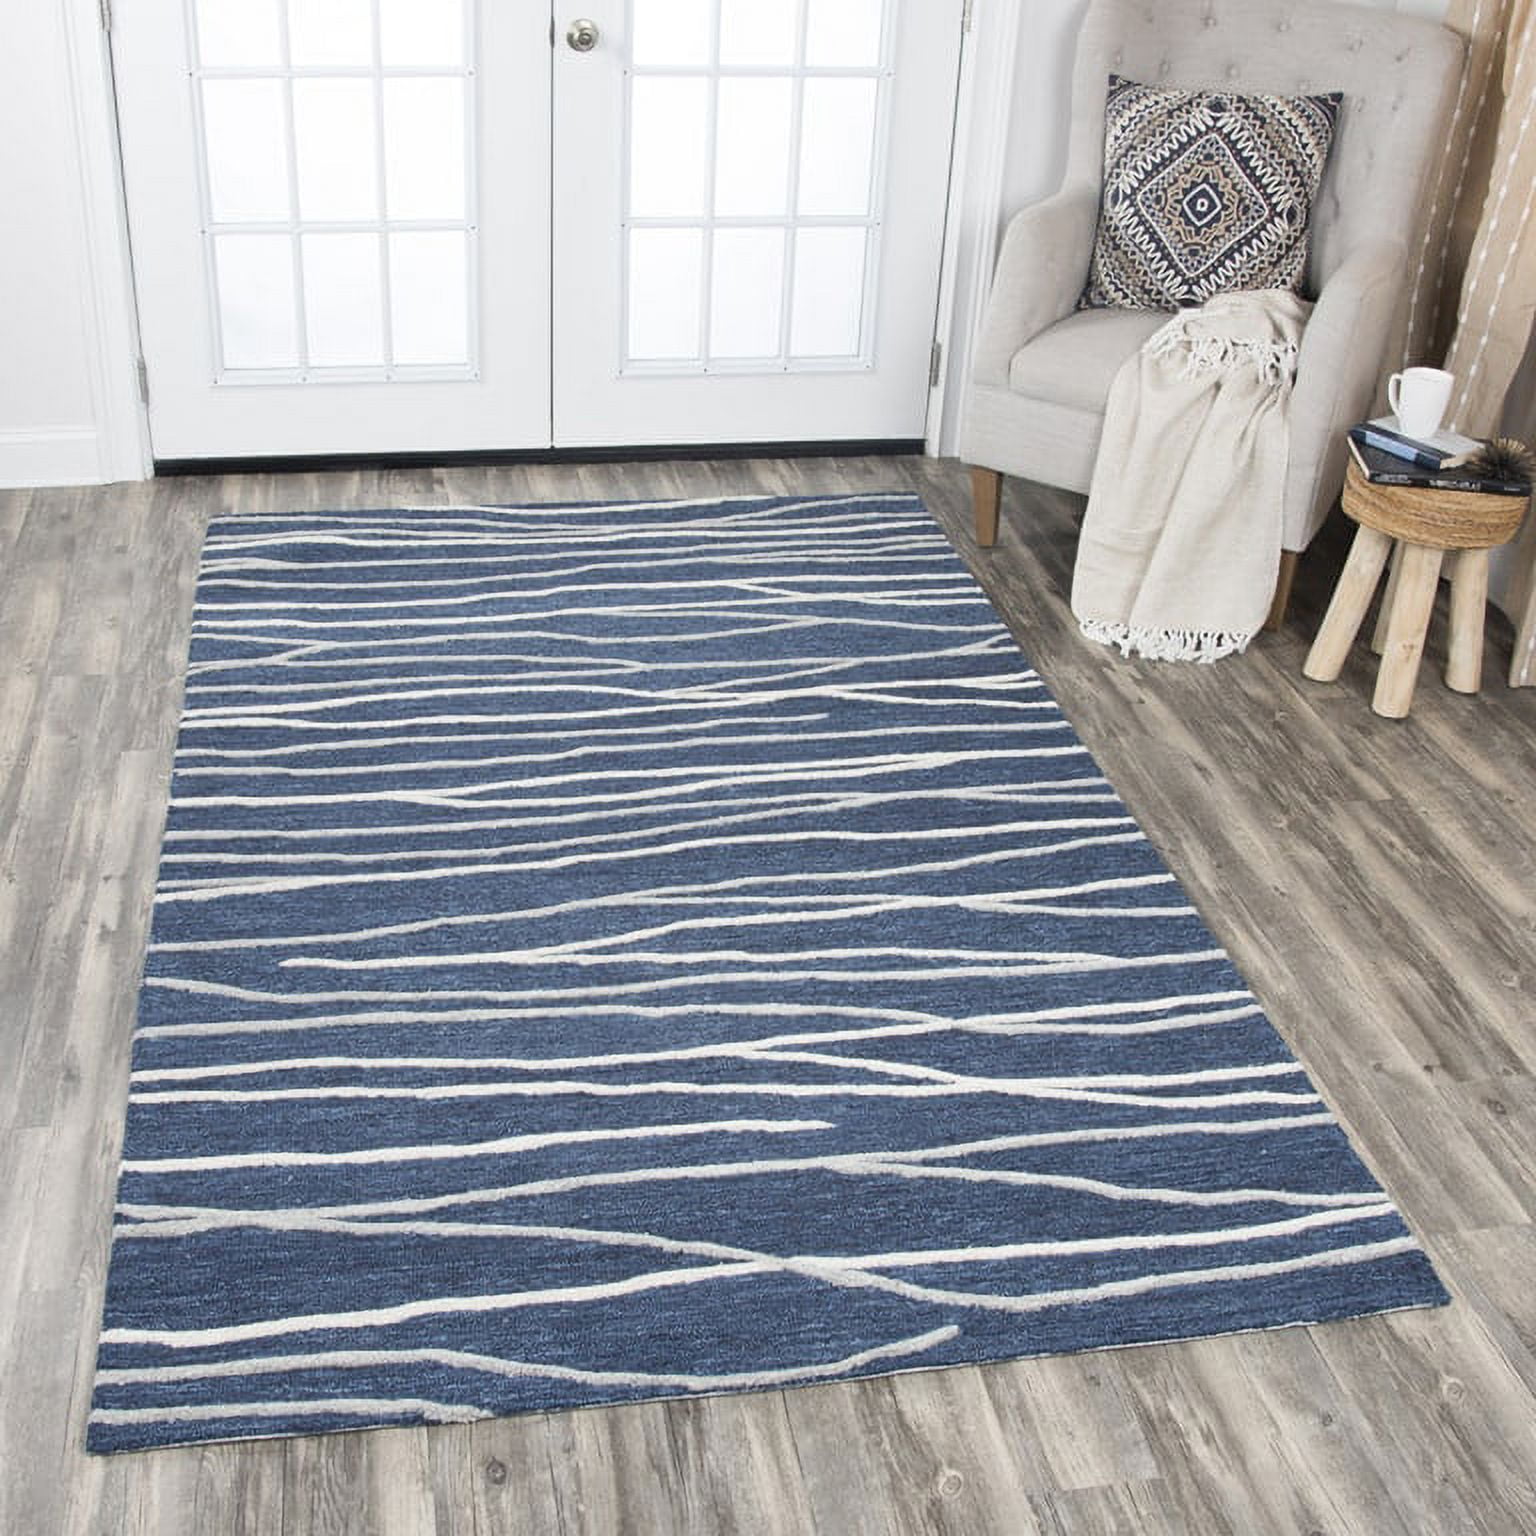 Rizzy Home Hand-tufted Idyllic Navy Wool Lines Area Rug - 8' x10